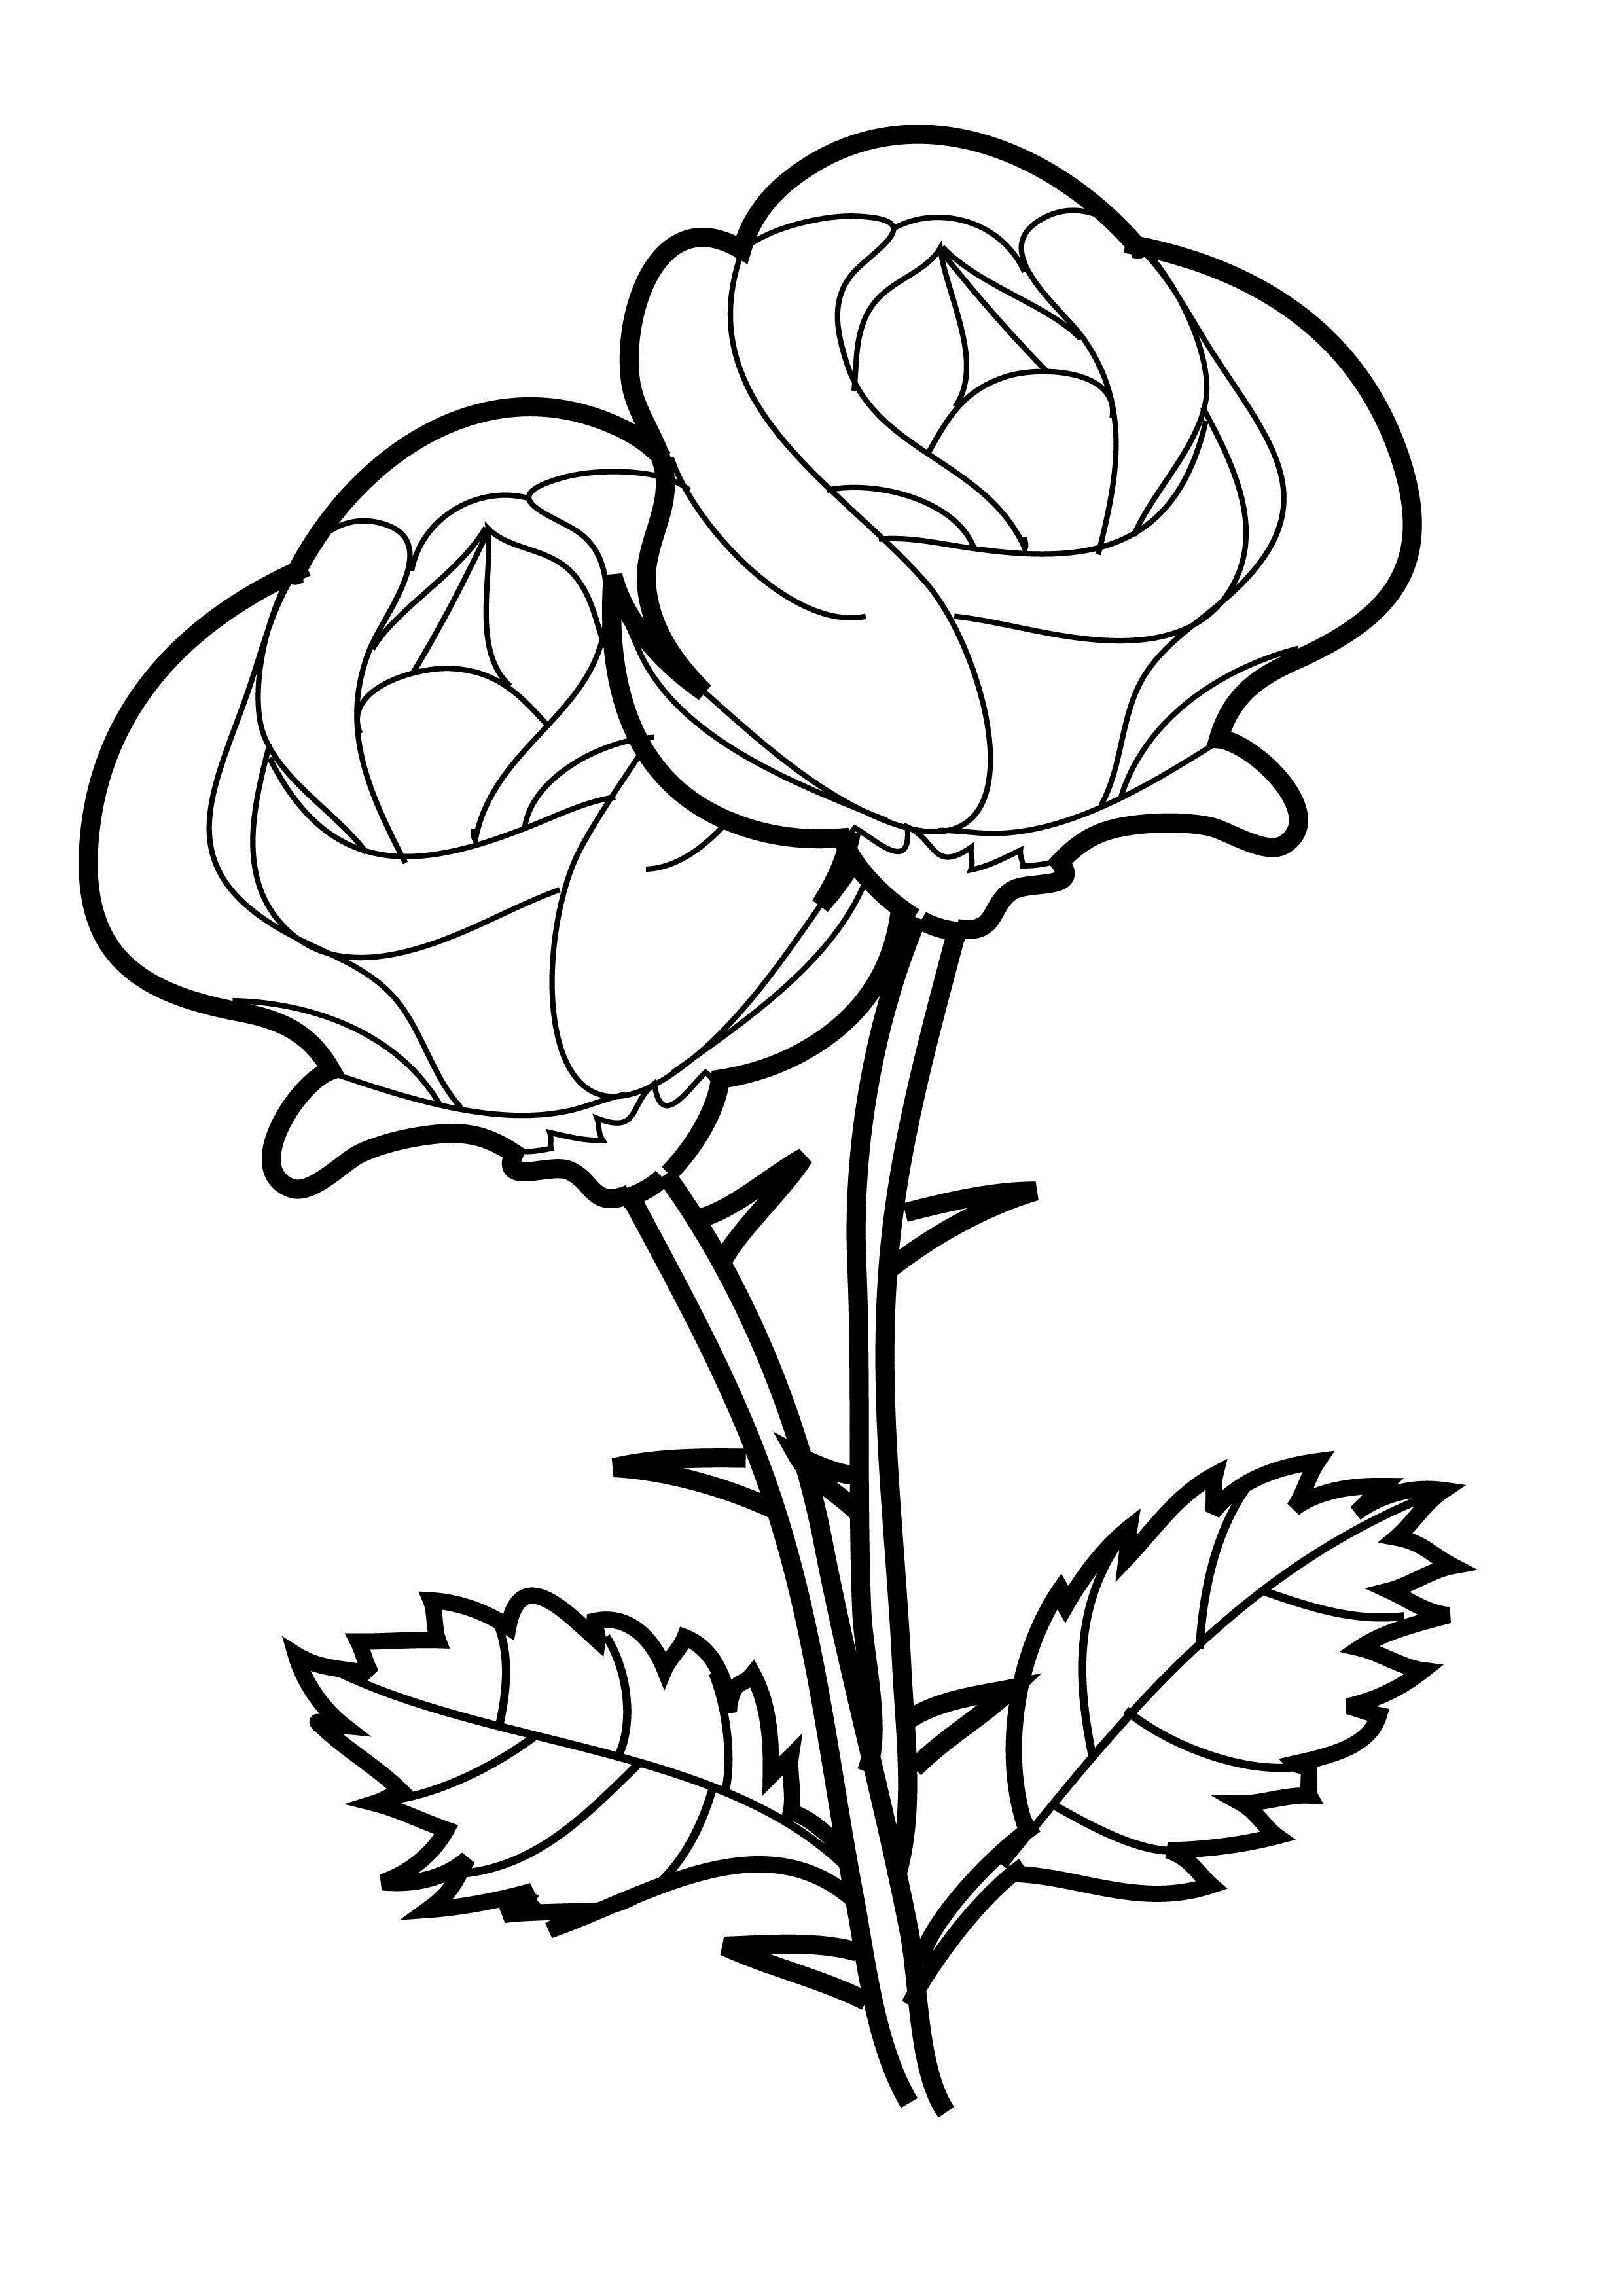 Coloring Sheets For Girls Rose
 Rose Coloring Pages for Girls Coloring Pages